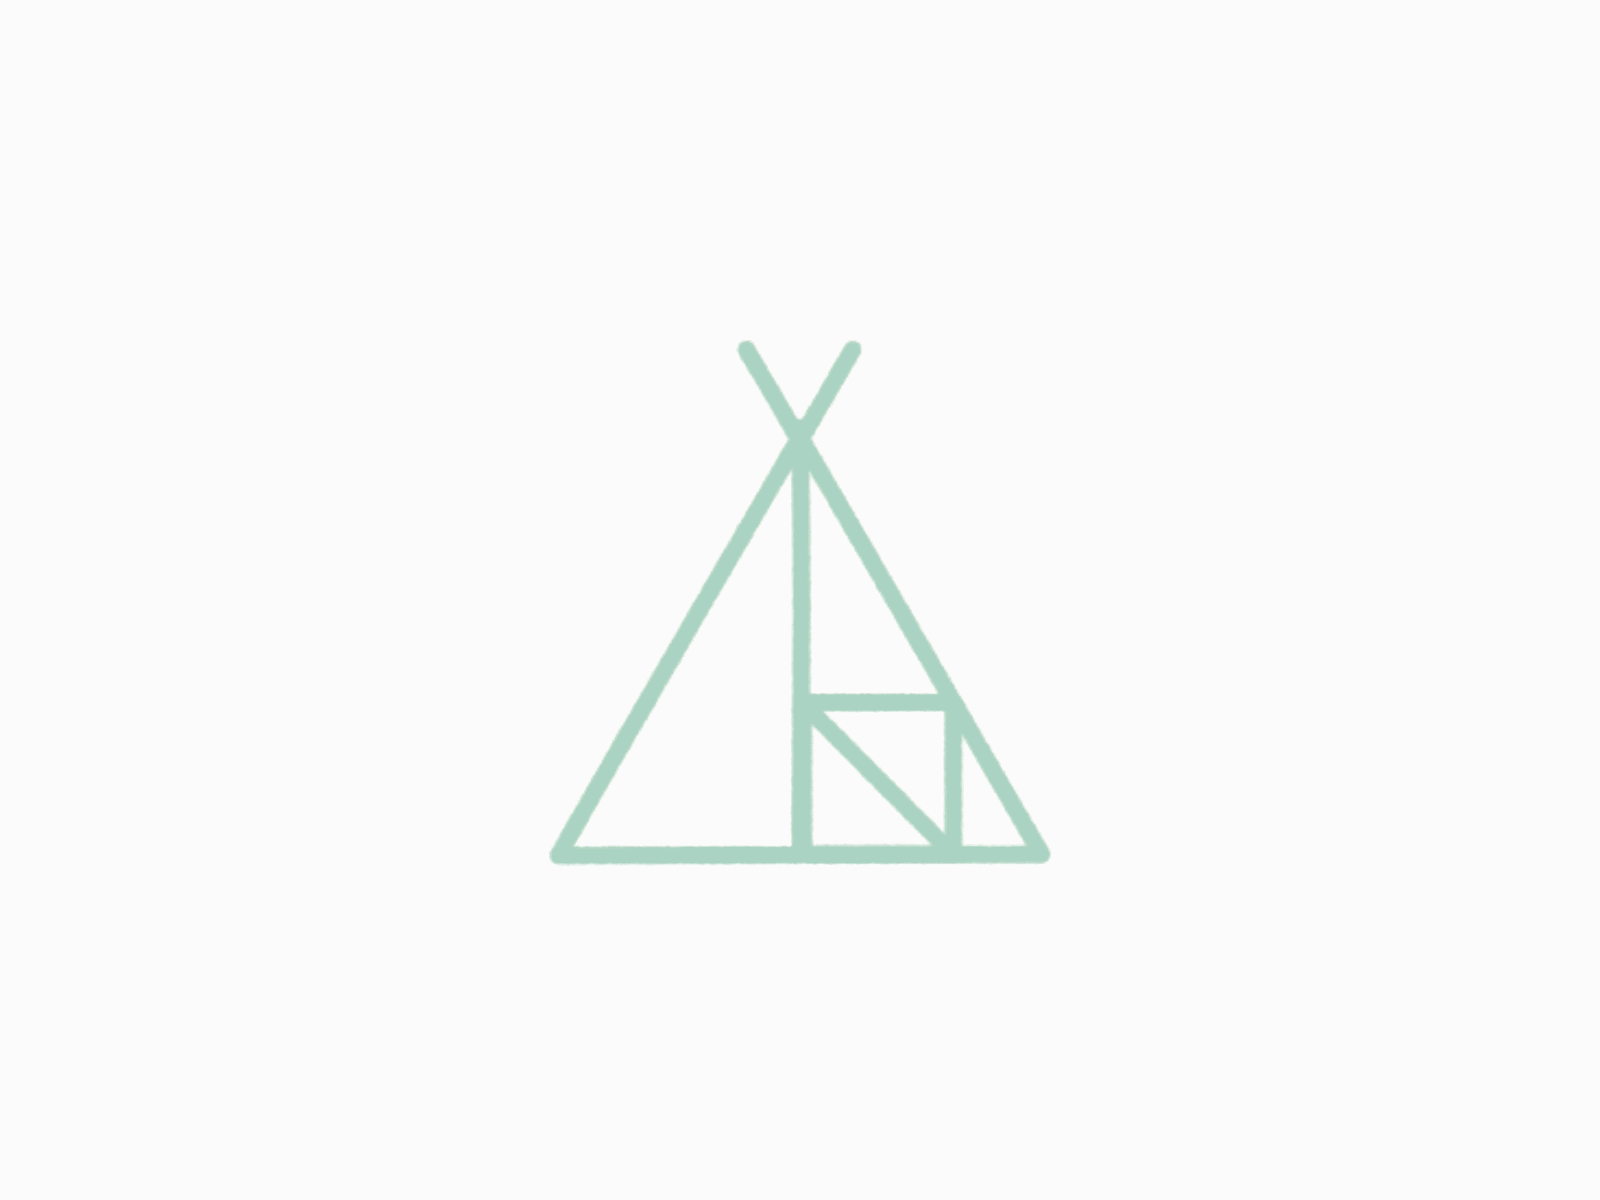 Camping Morphing Animation animation campfire canoe compass design illustration minimal modern nature pacific northwest pnw polaroid simple tent tree vector